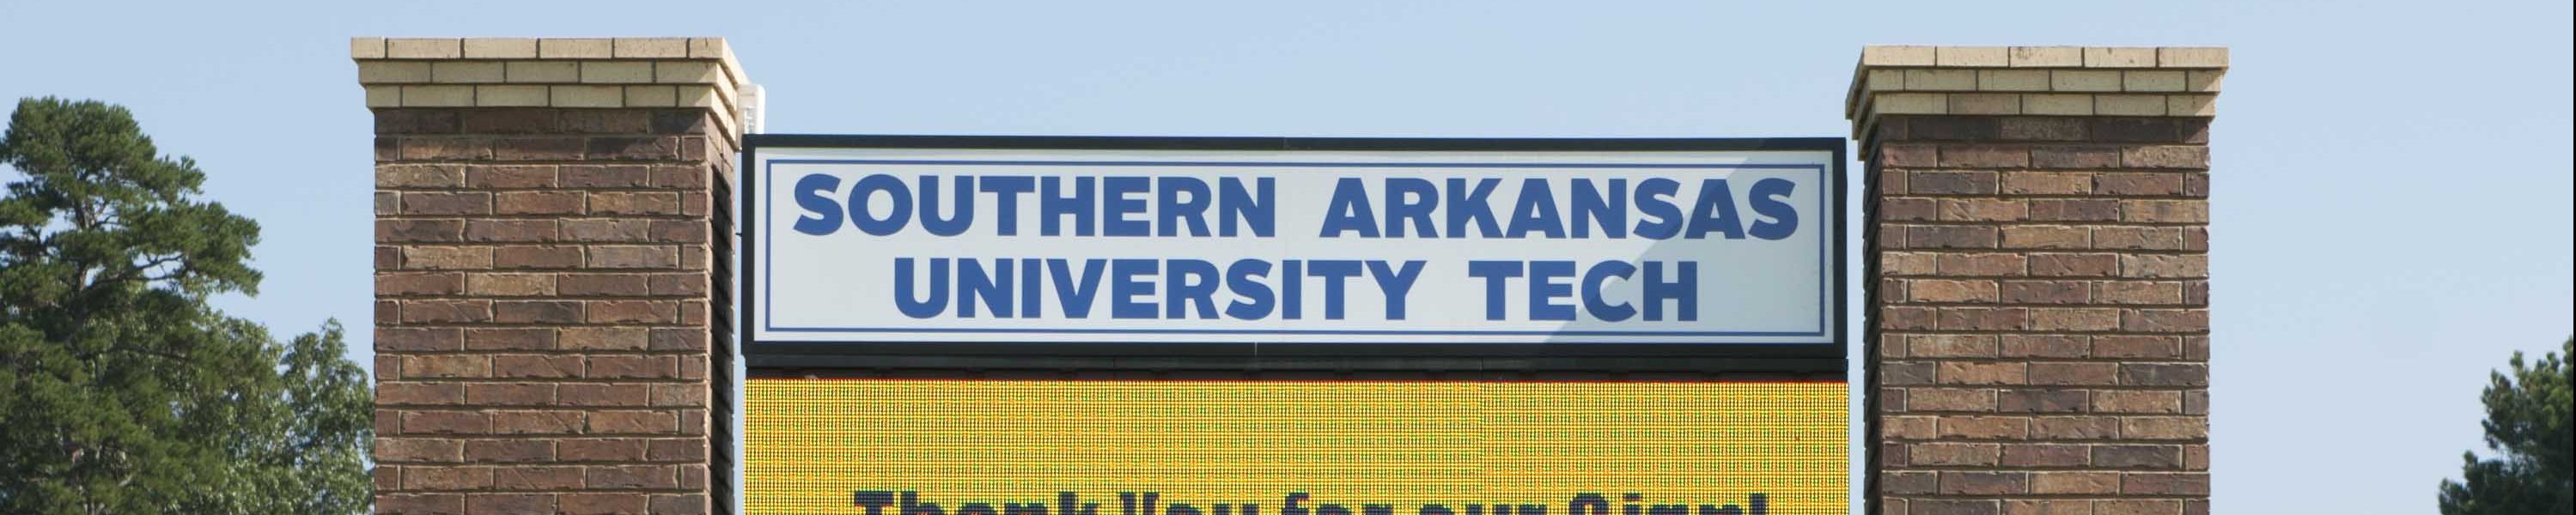 A welcoming sign on the Southern Arkansas University Tech campus.